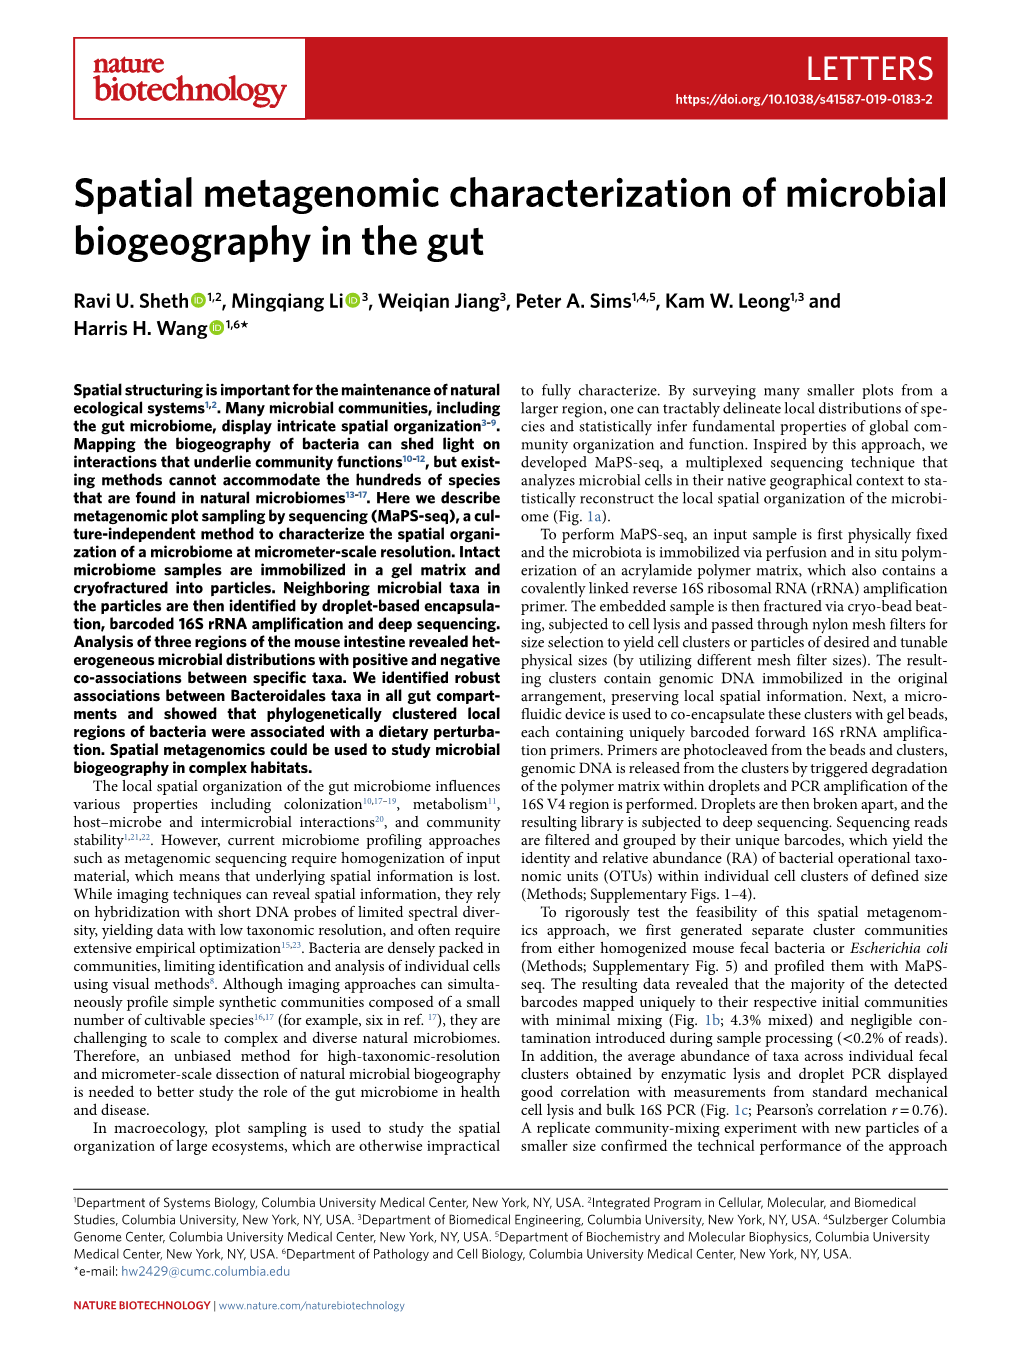 Spatial Metagenomic Characterization of Microbial Biogeography in the Gut